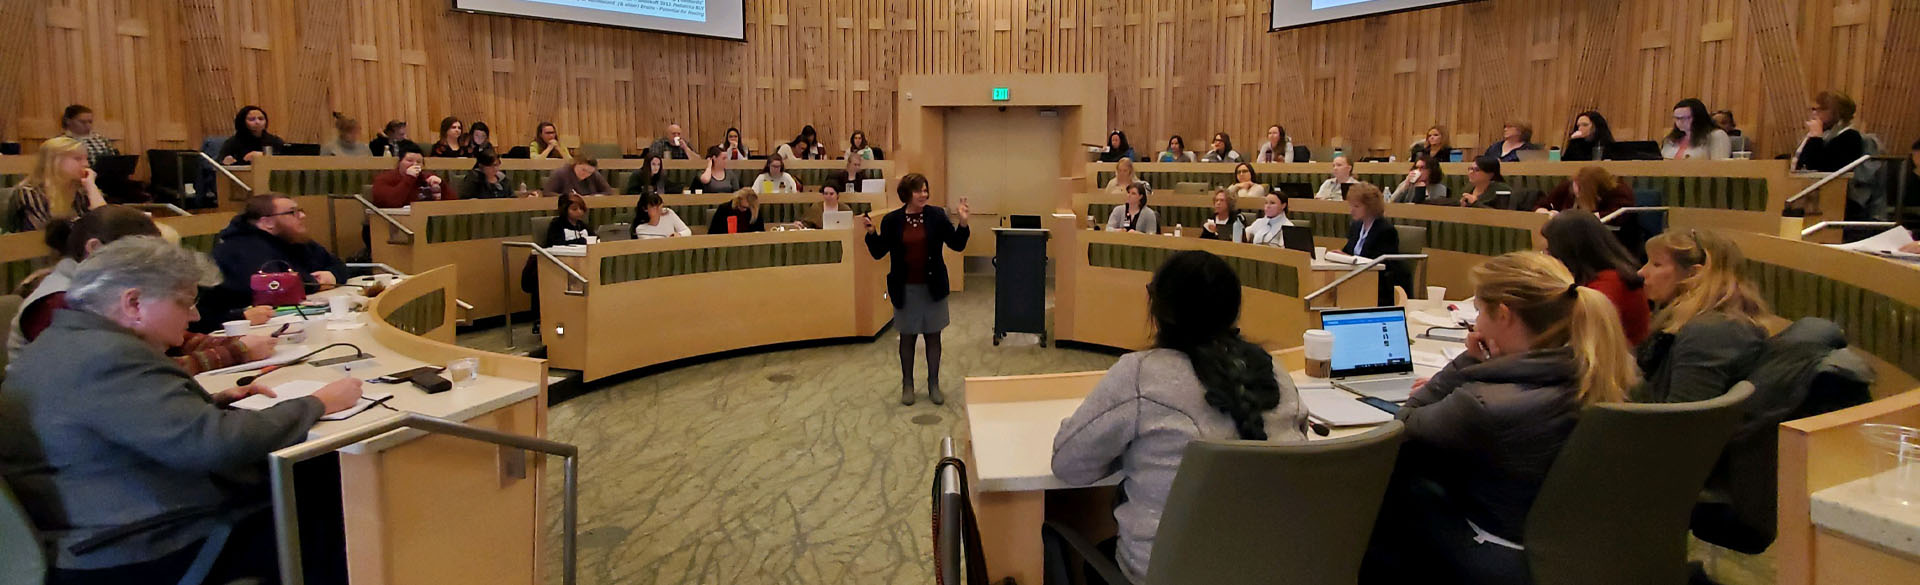 CU’s College of Nursing and CU Denver’s Center on Domestic Violence co-sponsored two-day seminar on Intimate Partner Violence (IPV)